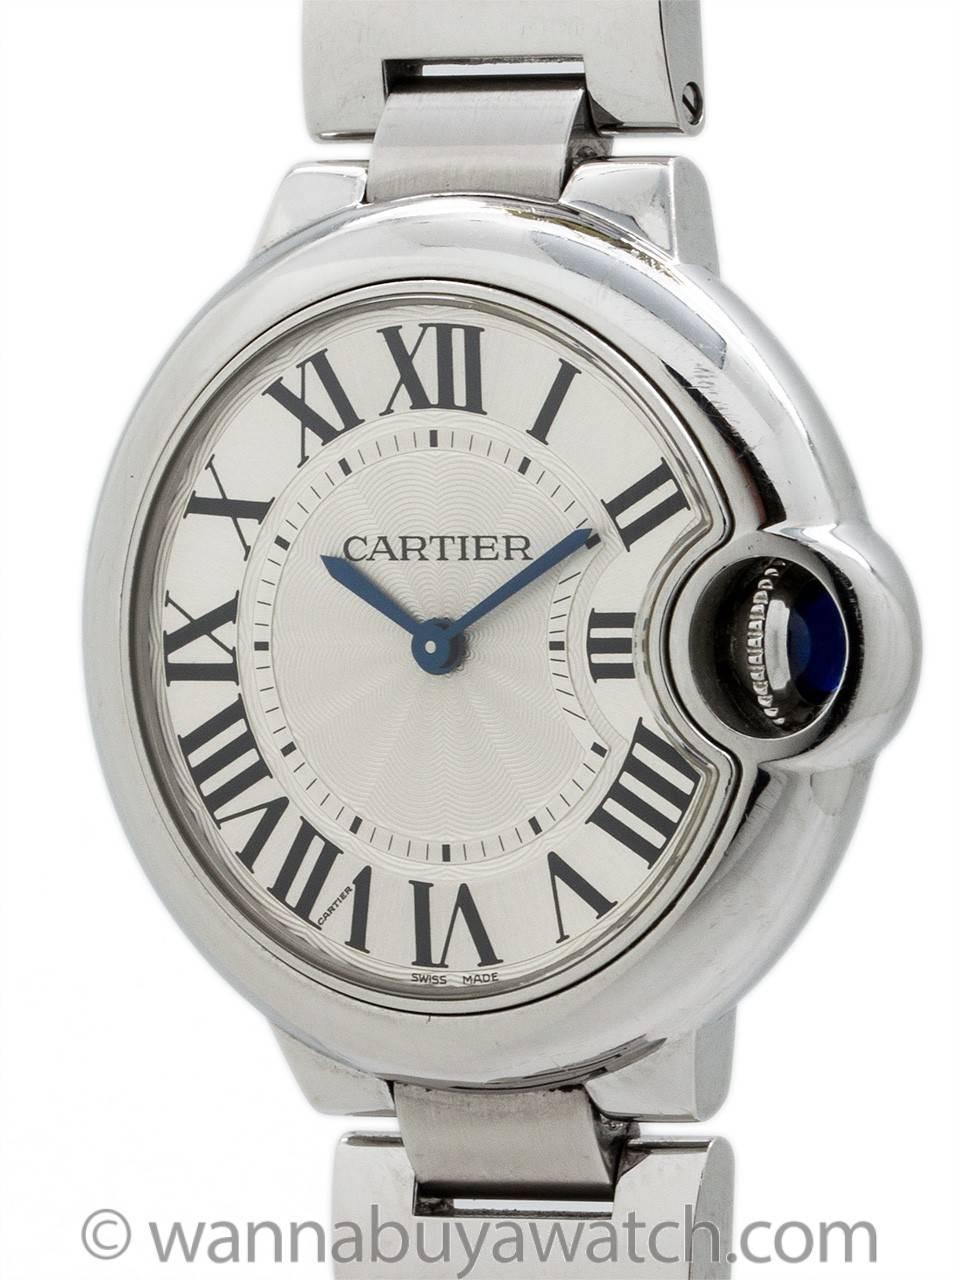 Cartier Stainless Steel Ballon Blue ref 3653 circa 2000’s. Featuring 33 X 35mm diameter case with smooth bezel, sapphire crystal and protected blue sapphire cabochon crown. Classic silvered guilloche dial with large printed black Roman numerals and